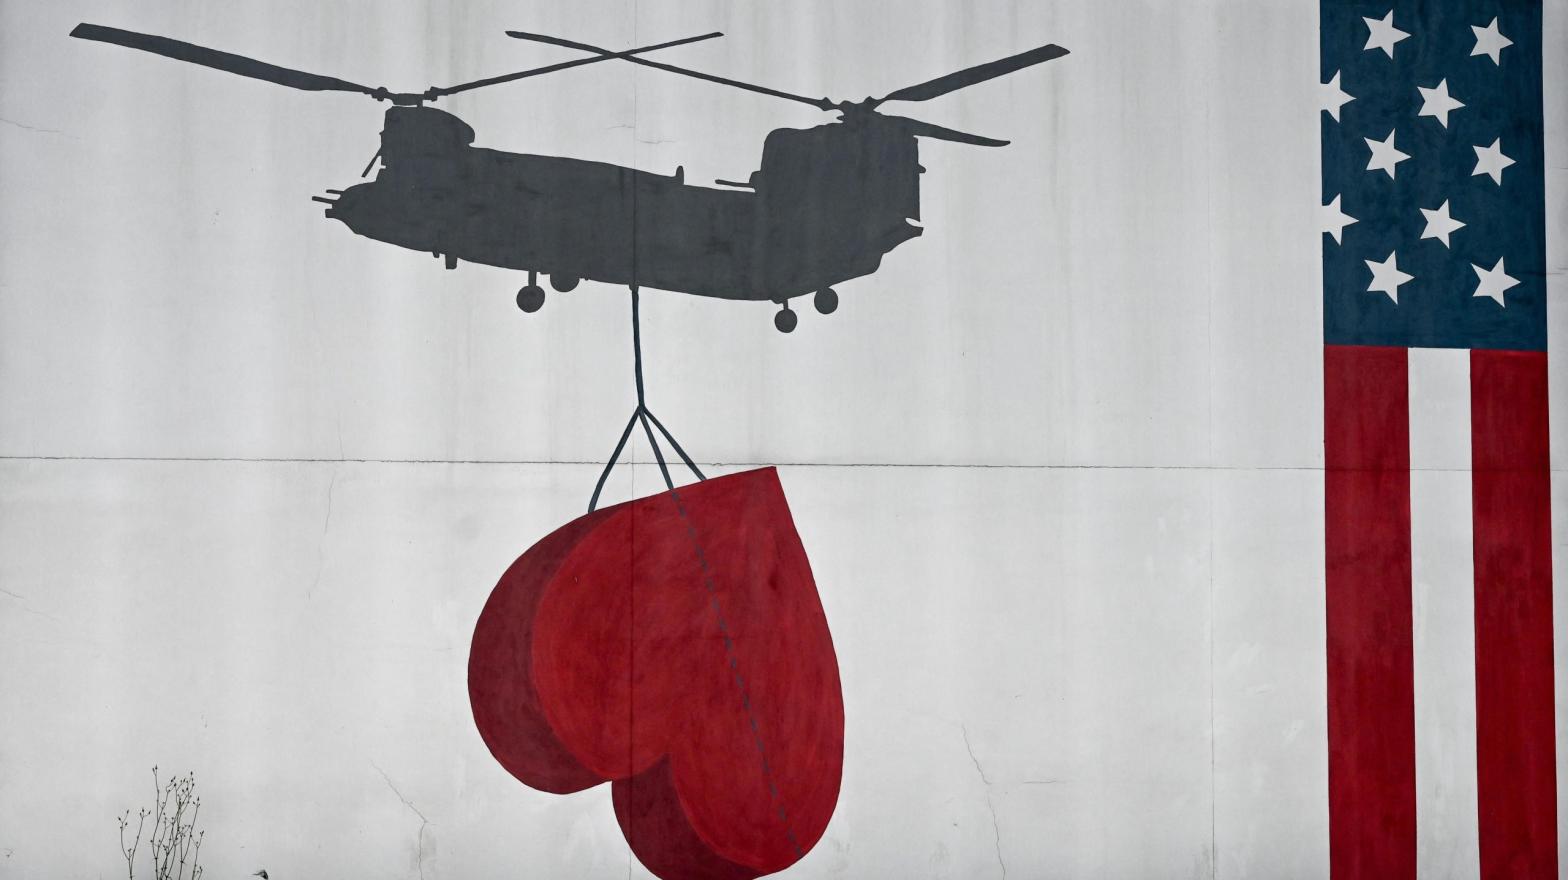 A wall mural painted on the wall of U.S. embassy in Kabul on July 30, 2021. (Photo: Sajjad Hussain / AFP, Getty Images)